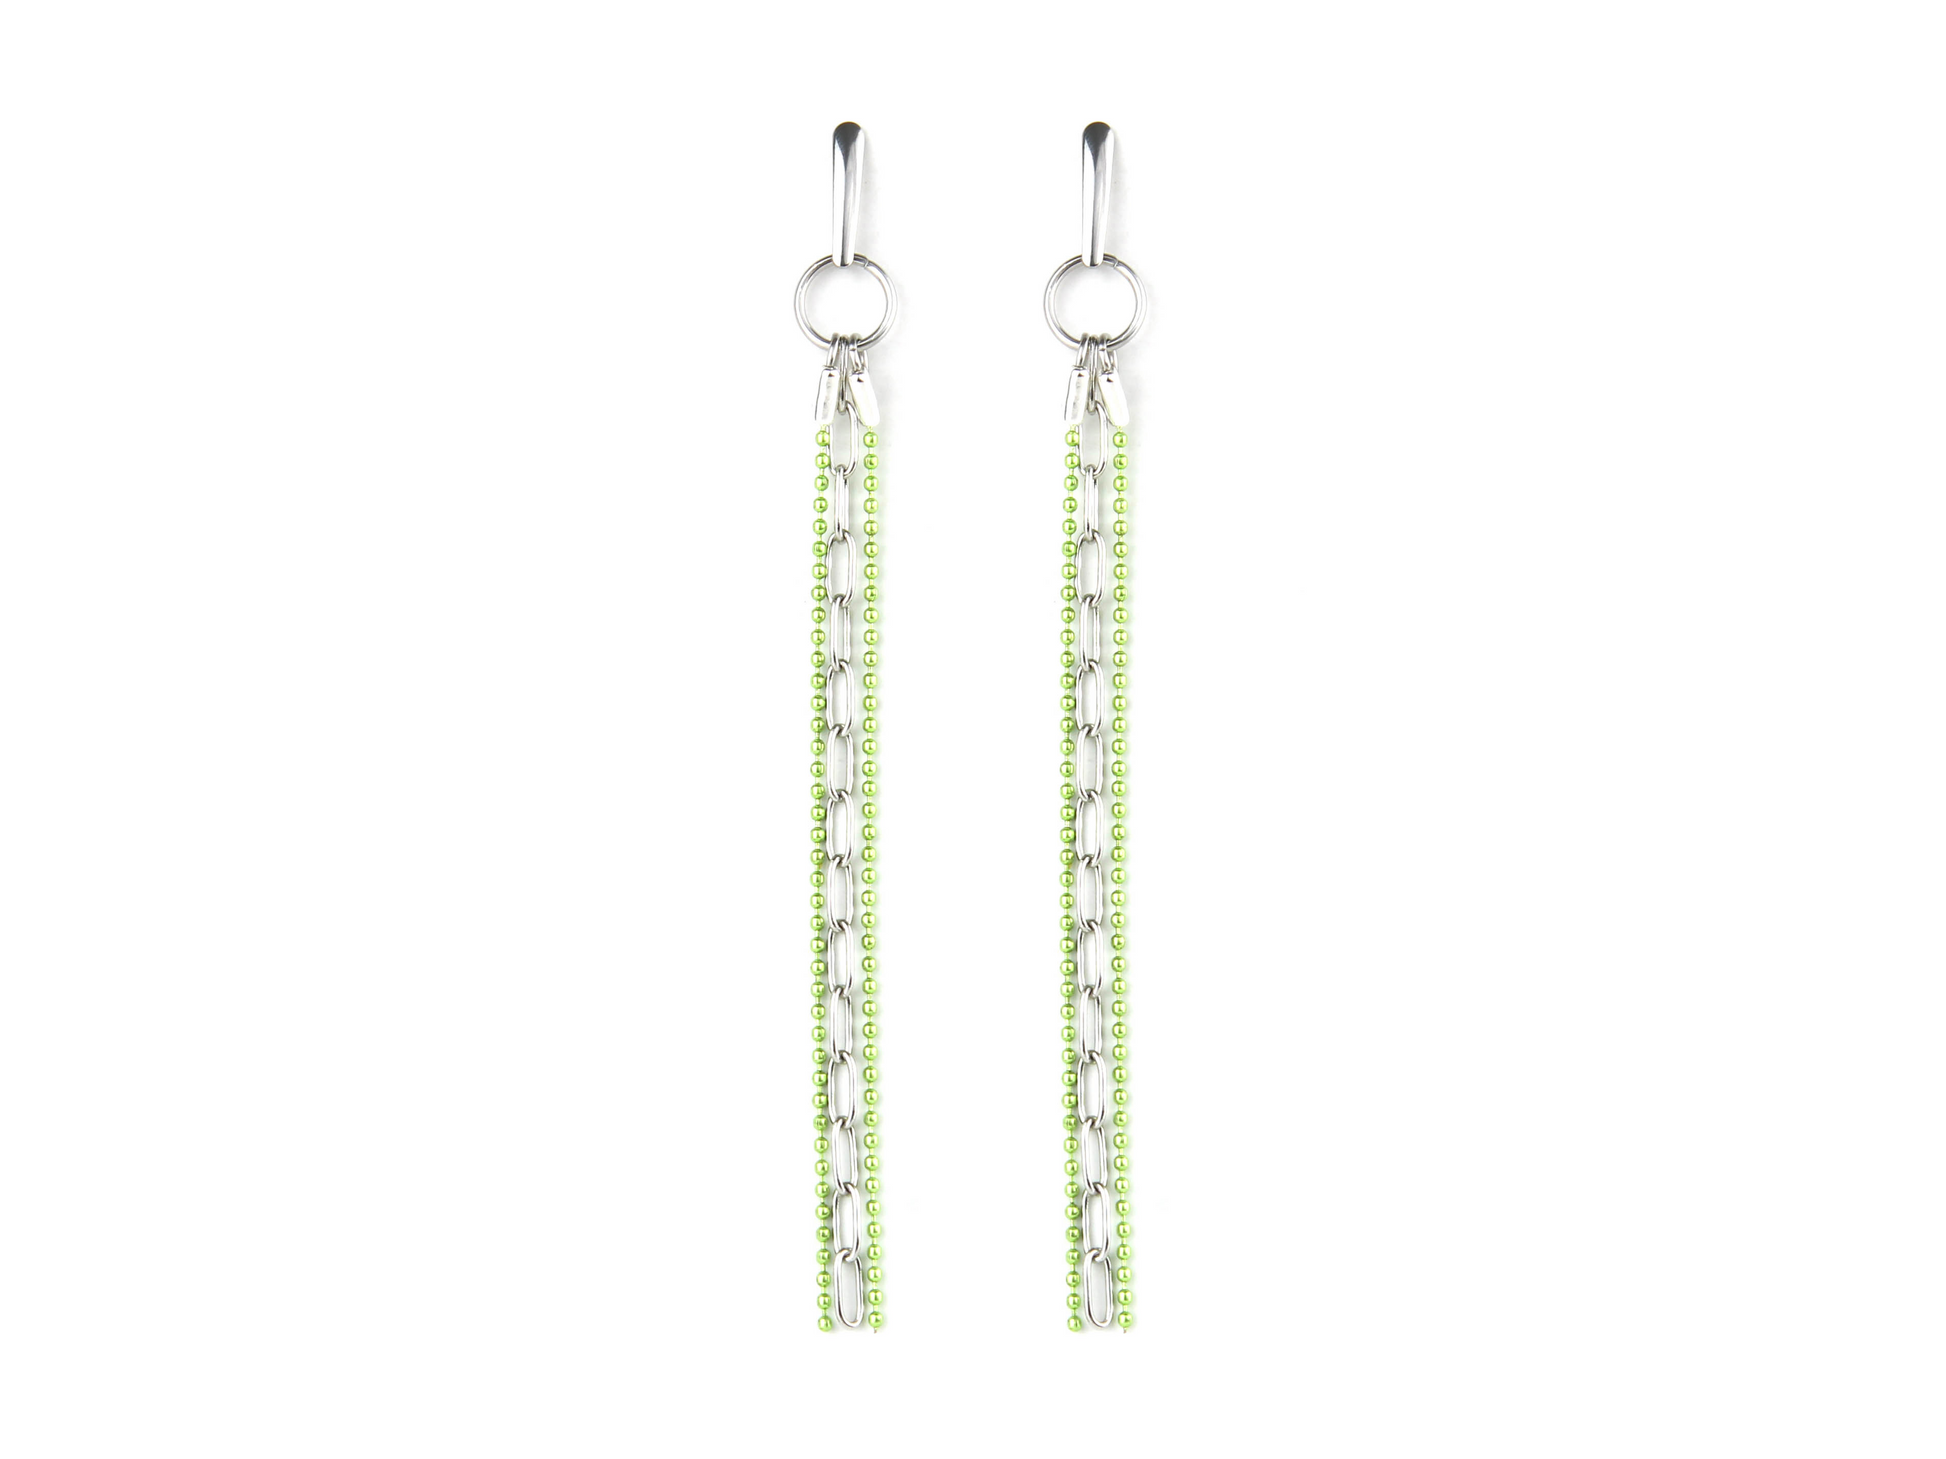 A pair of neo-gothic style earrings by Myril Jewels, featuring long chains of shimmering green beads cascading from silver hoops. These bold, handcrafted pieces embody the dark-avantgarde aesthetic, perfect for gothic-chic enthusiasts or as a unique goth girlfriend gift, suitable for Halloween events or everyday wear.